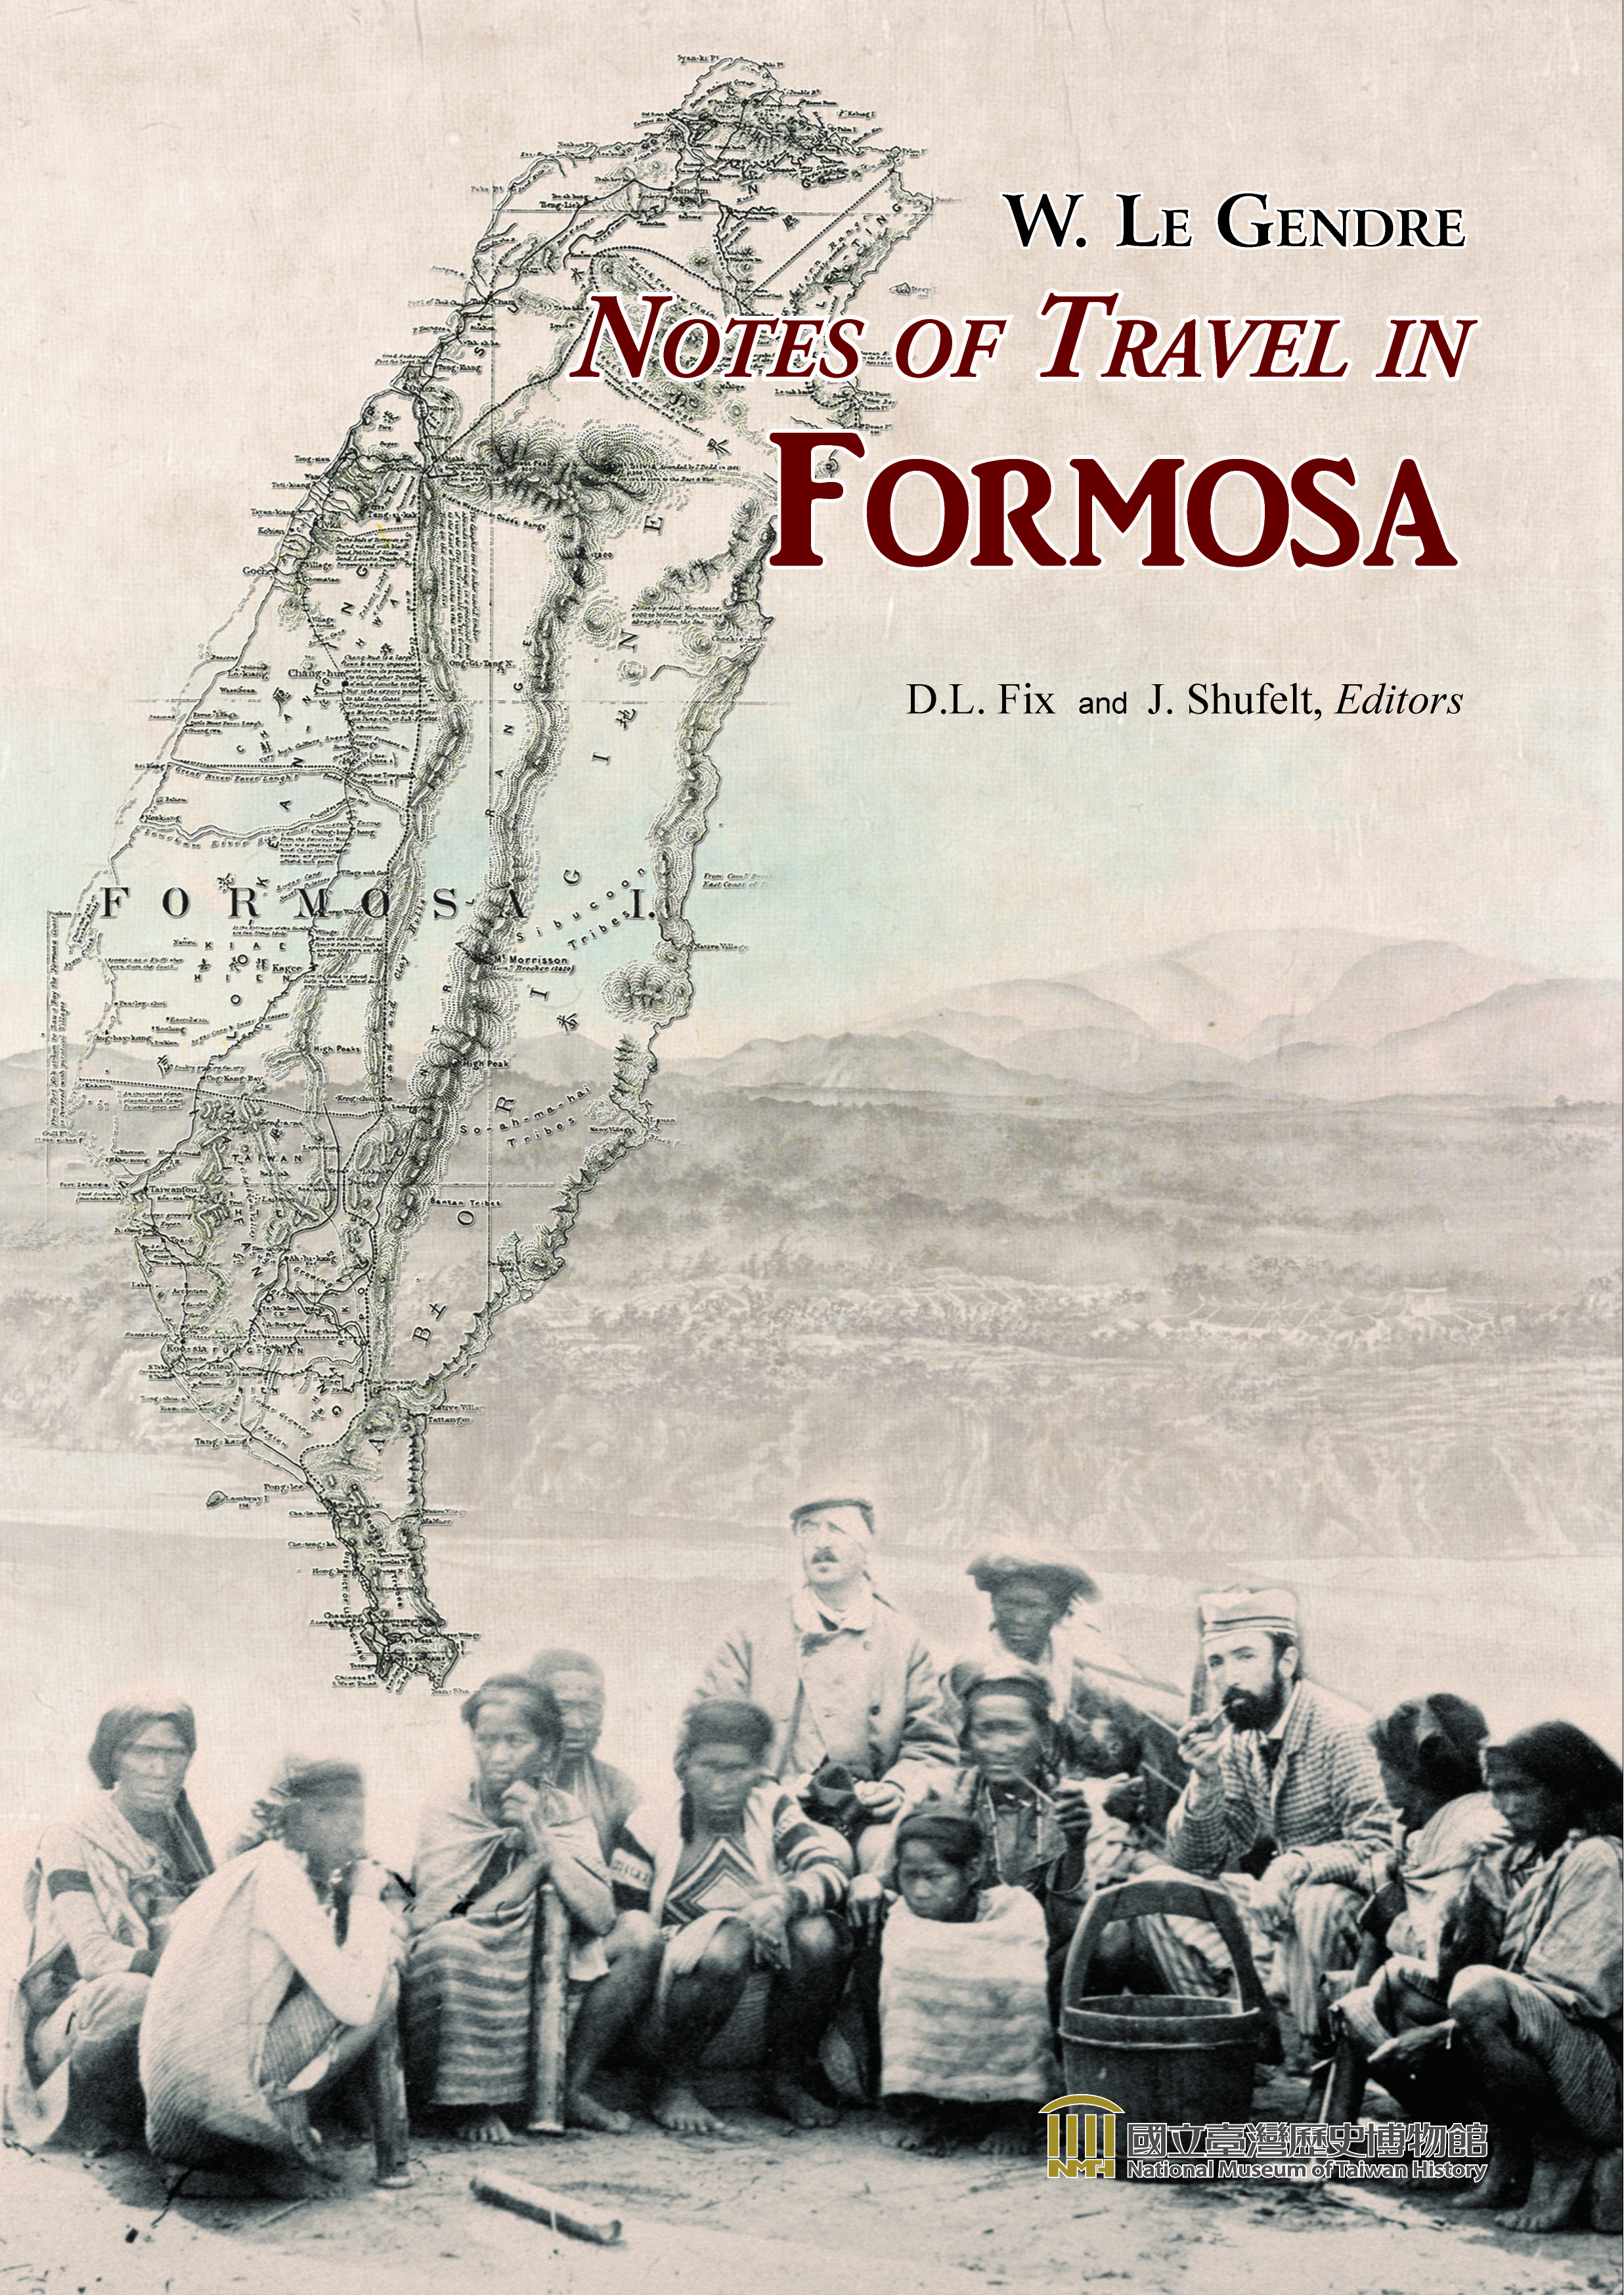 Notes of Travel in Formosa